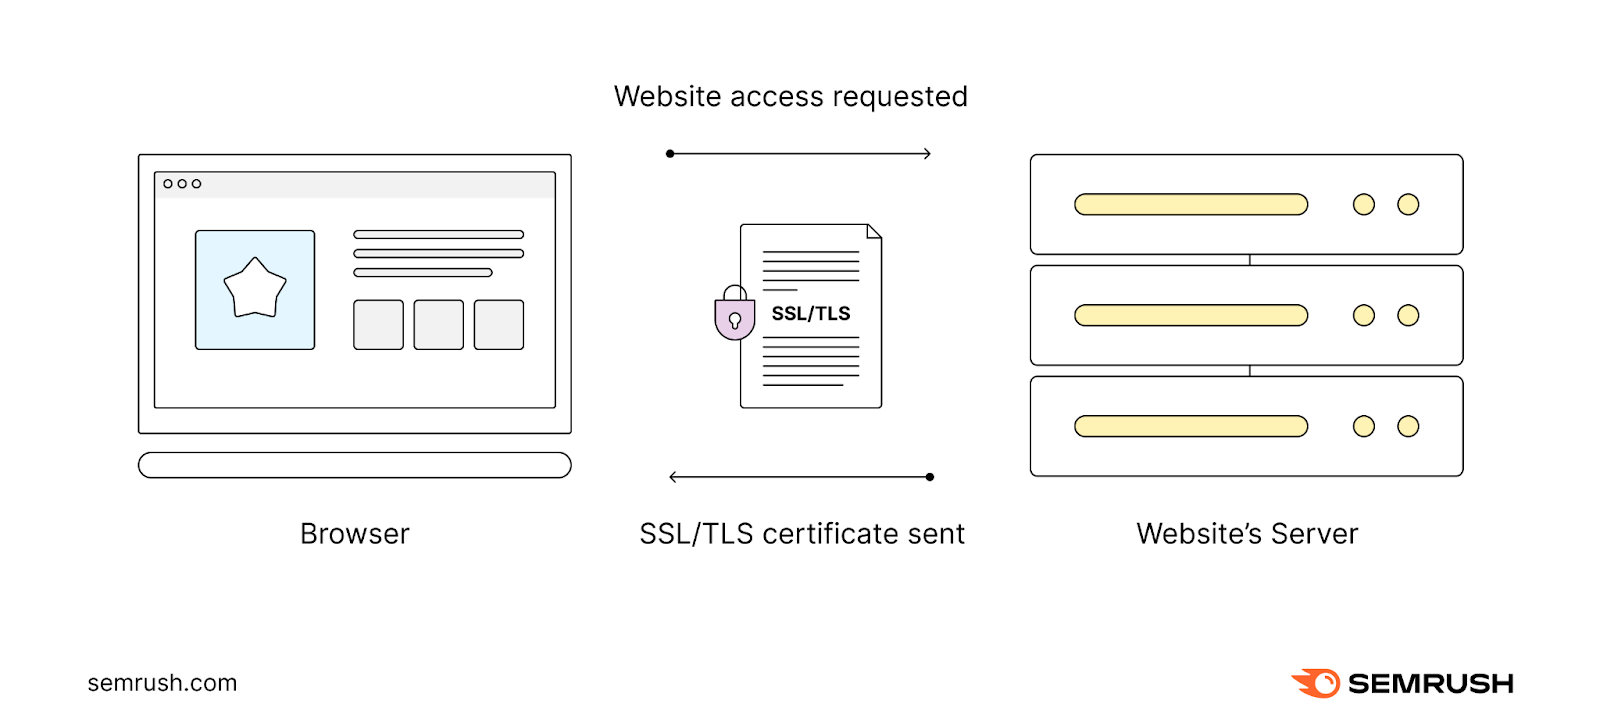 A website's server sending SSL/TLS certificate to a web browser attempting to link  to the website utilizing HTTPS